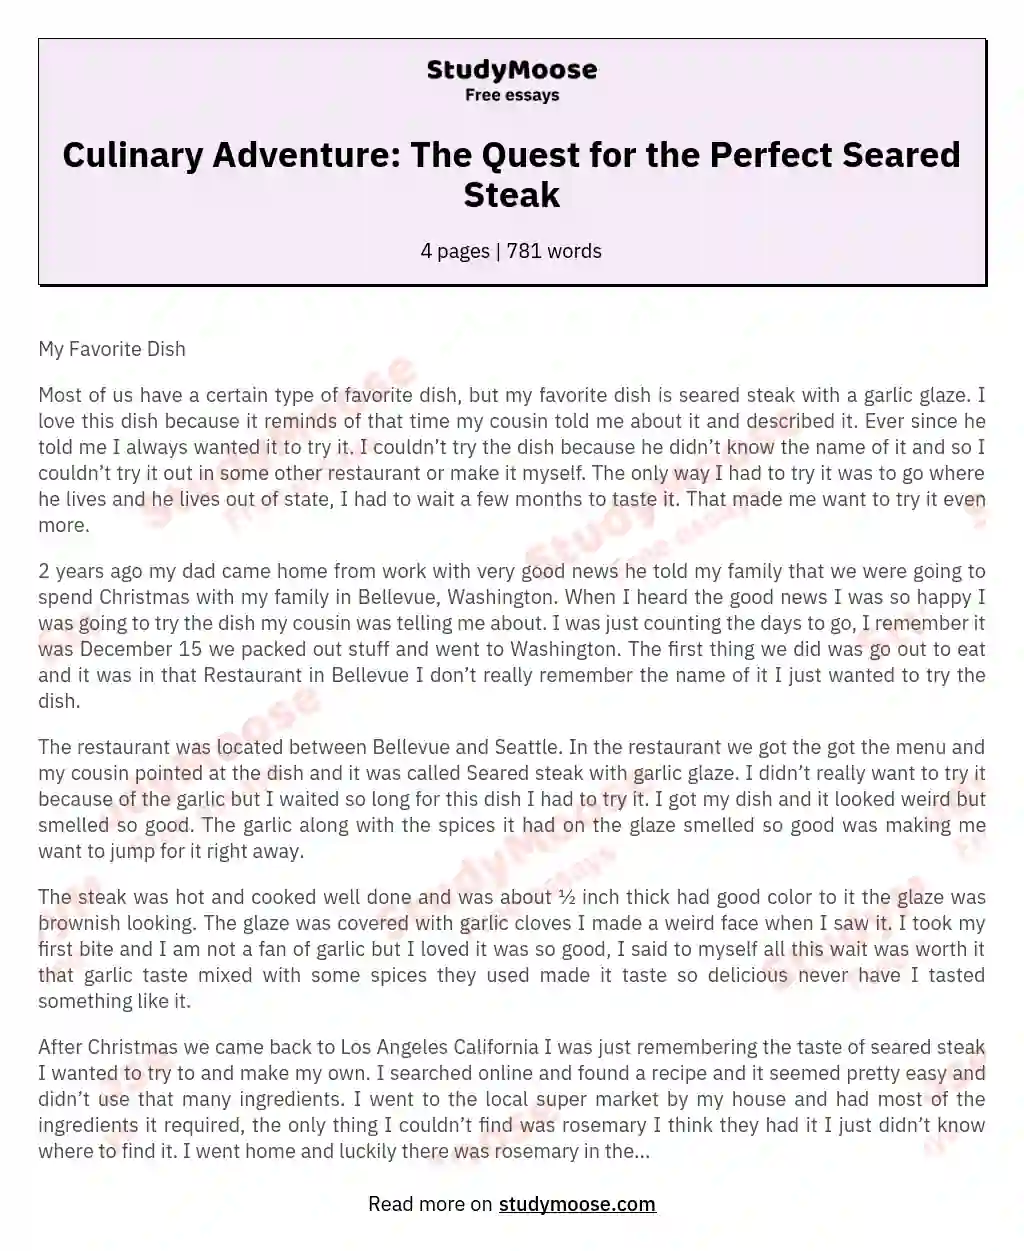 Culinary Adventure: The Quest for the Perfect Seared Steak essay